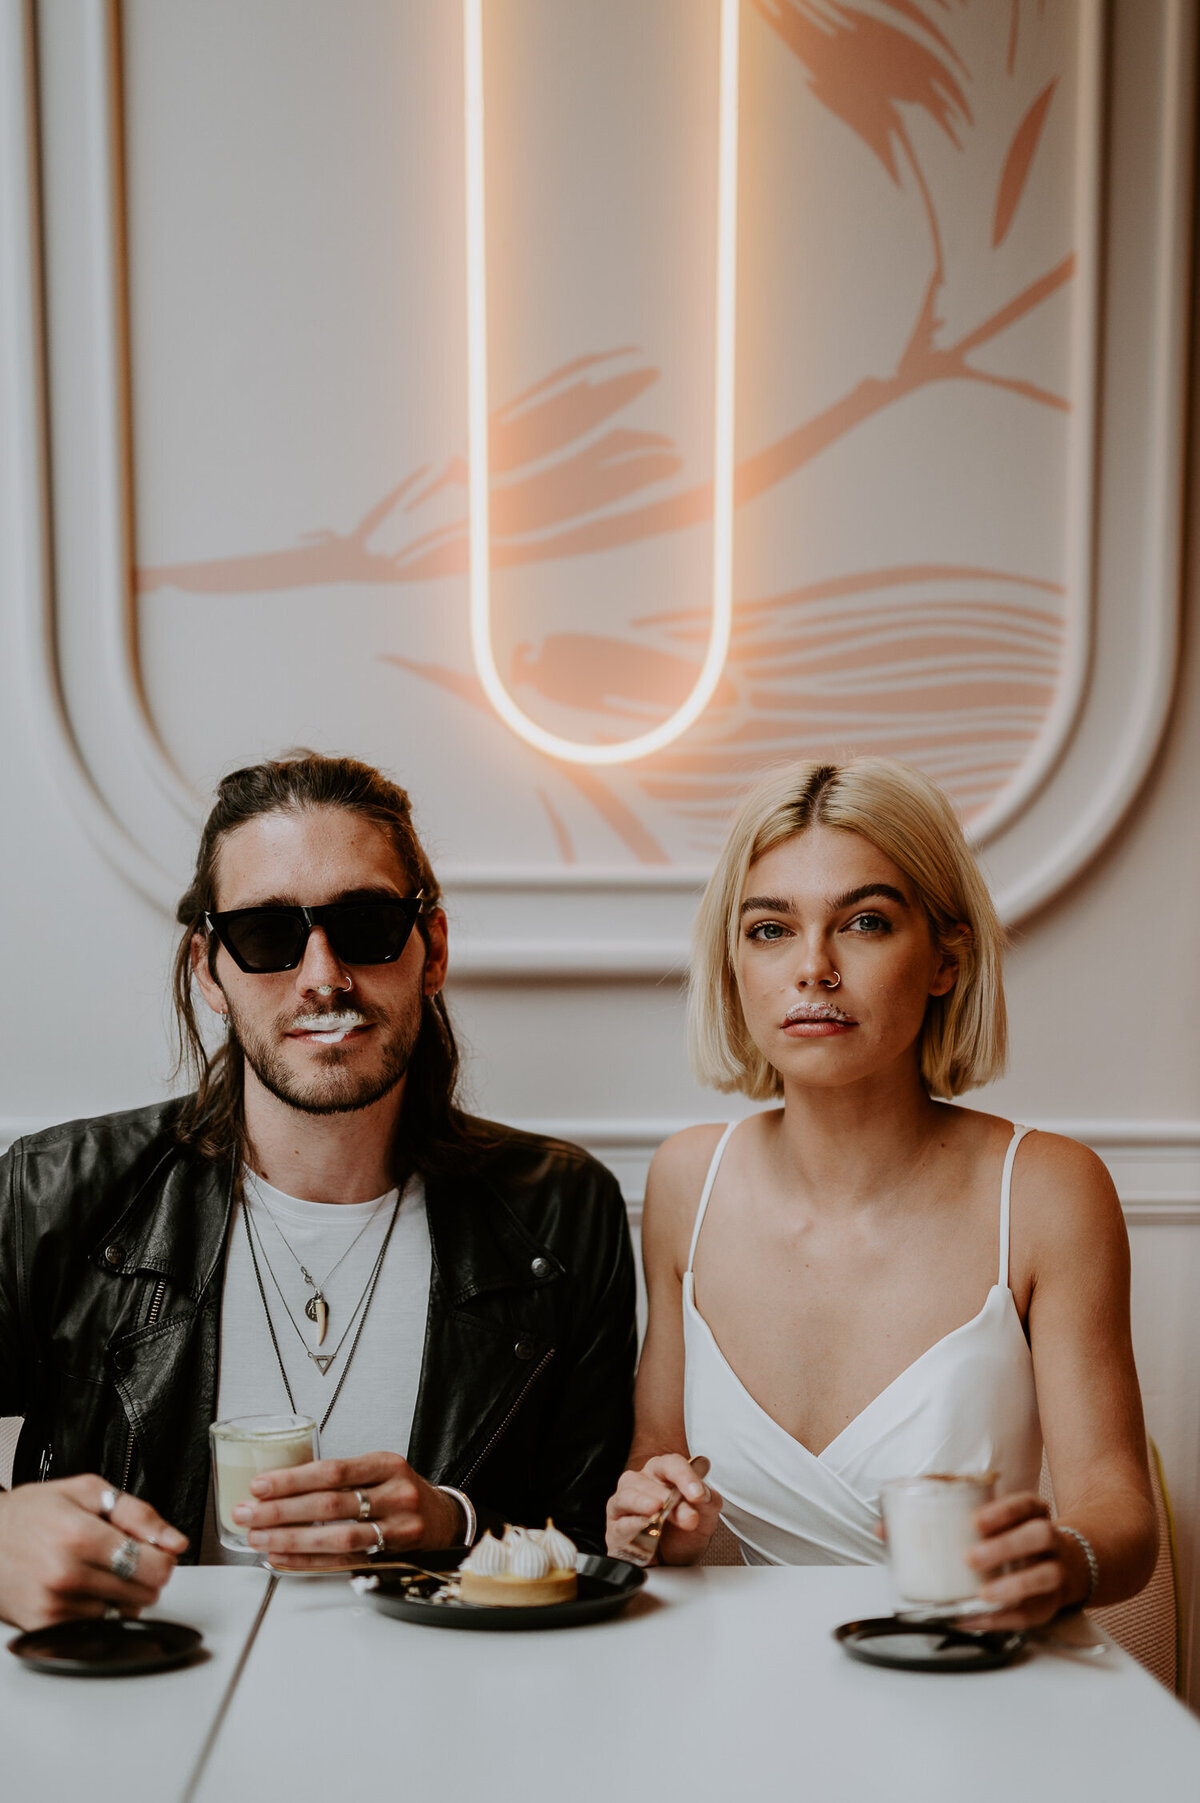 A couple sit in a coffee shop in Soho, London. They both have coffee moustaches, the groom has glasses, long hair and is wearing a leather jacket. The bride is wearing a strappy wedding dress from Justin Alexander.